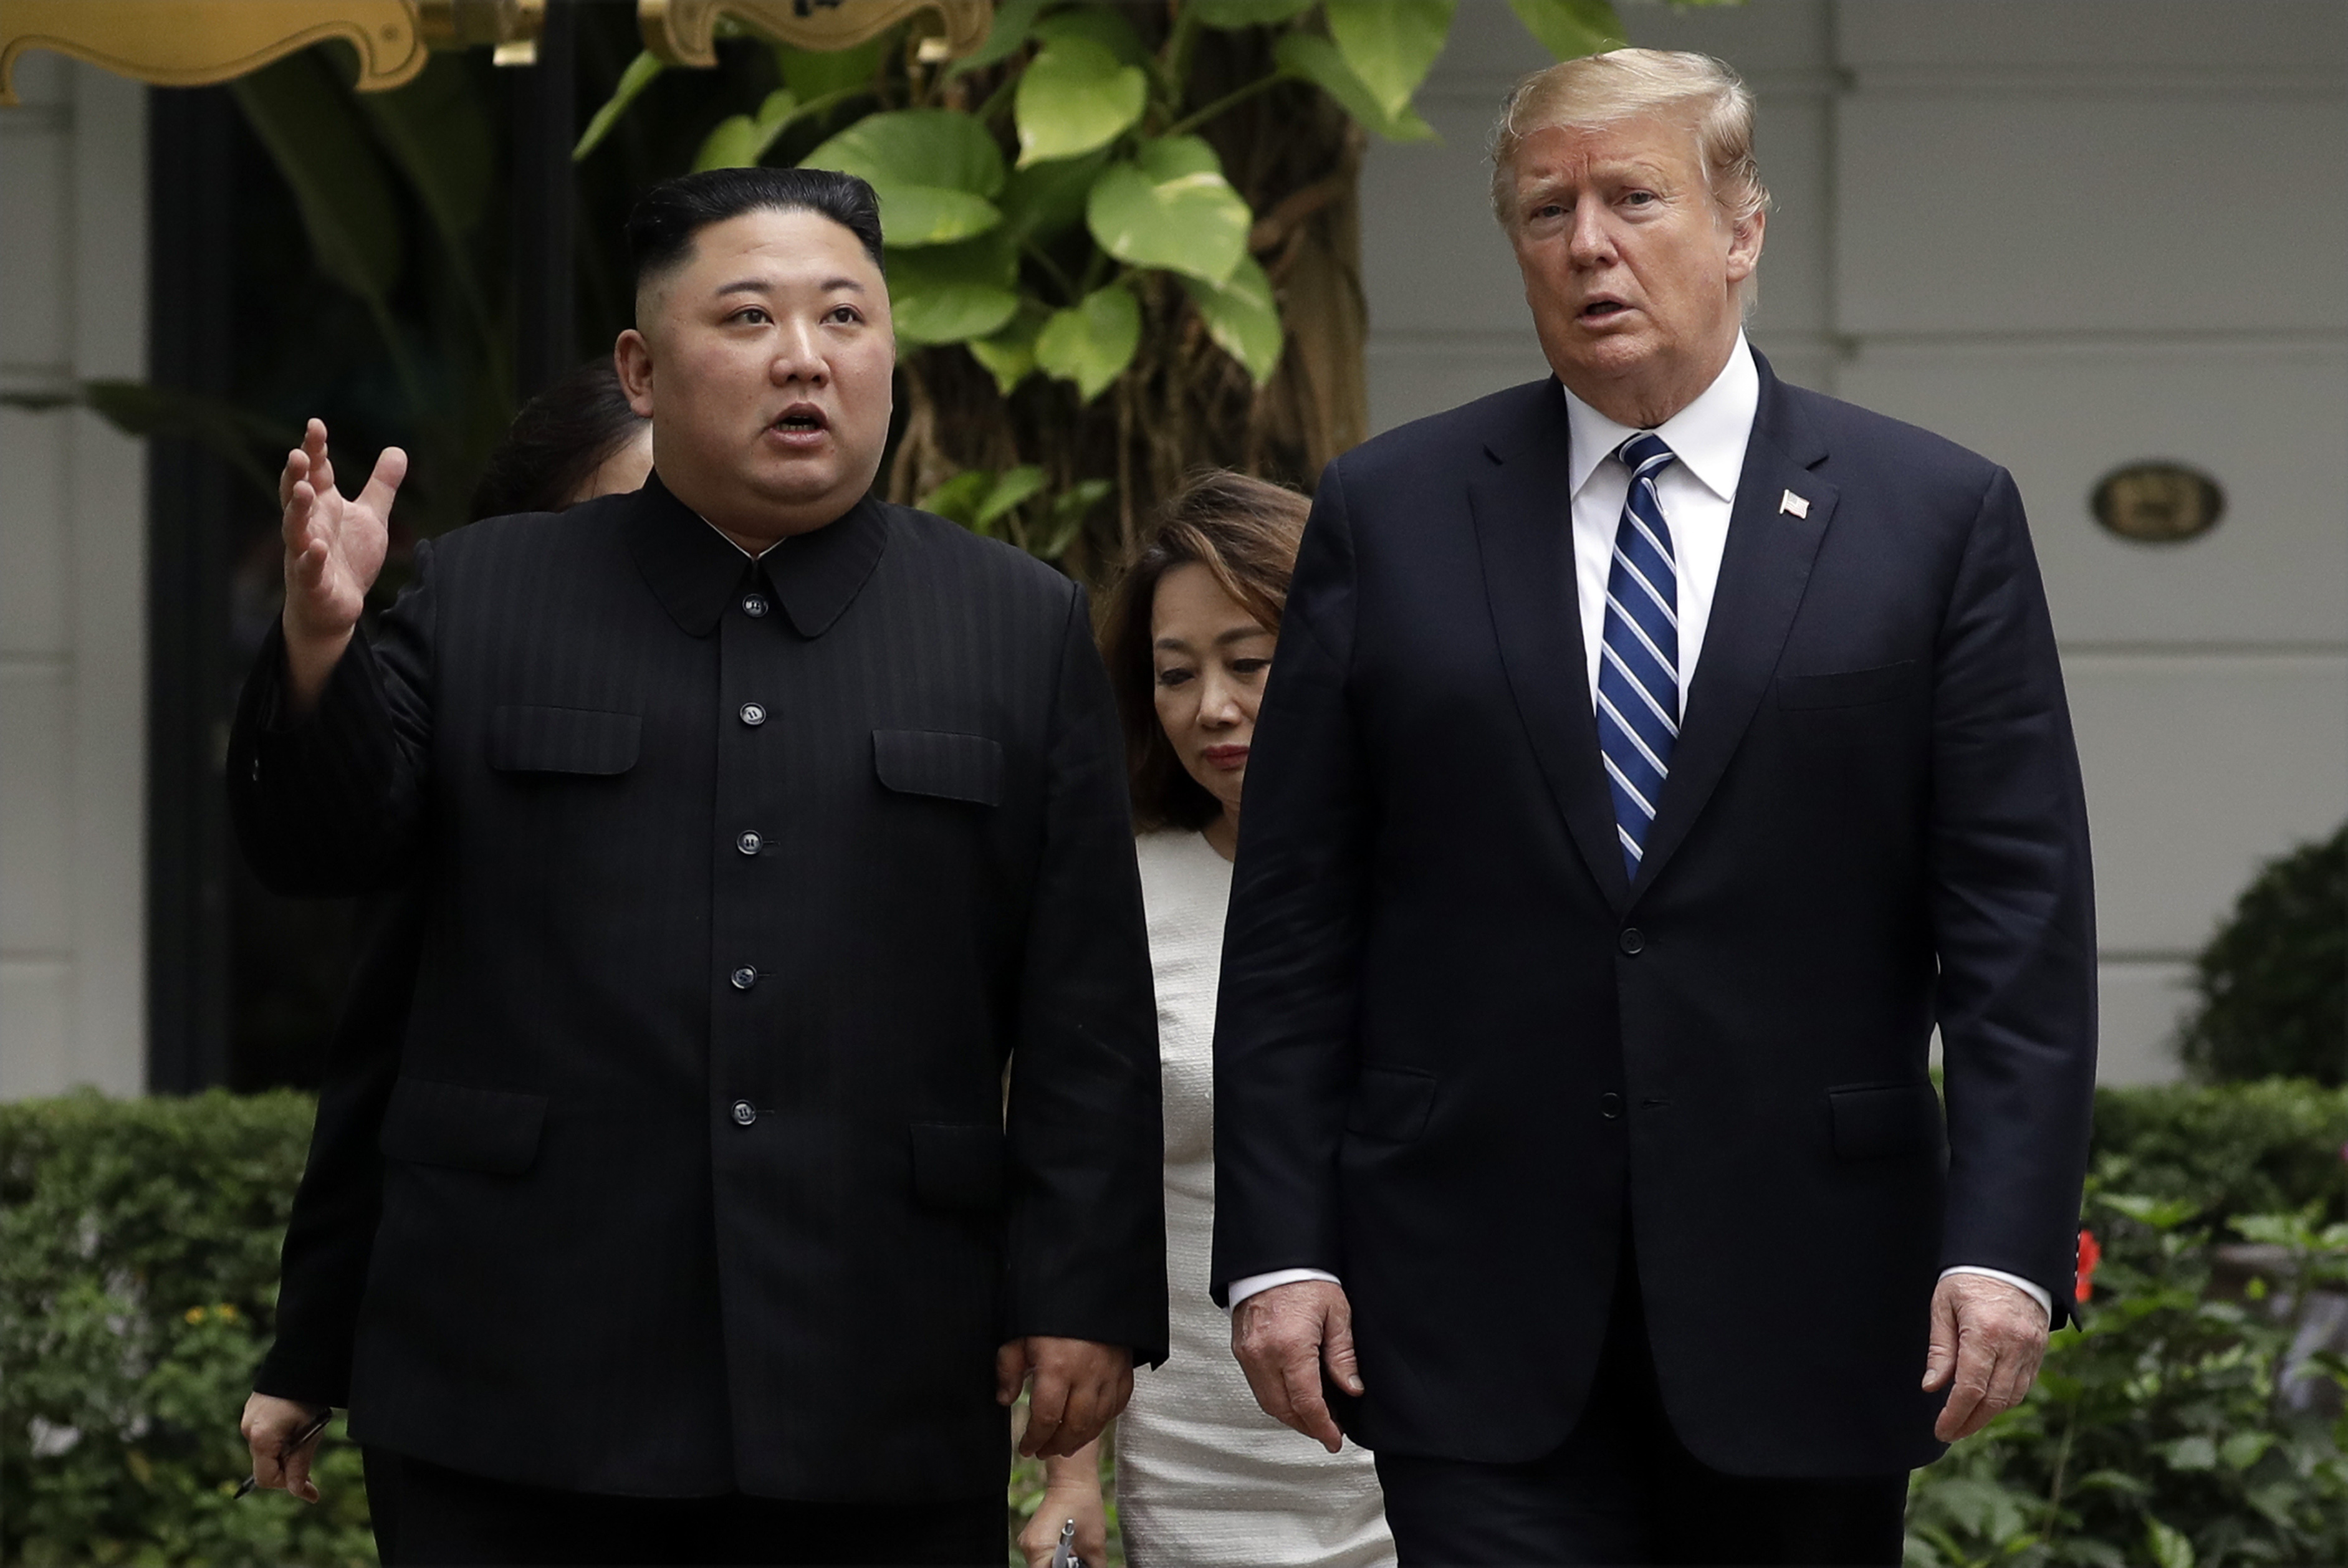 Kim Jong Un says he's open to another summit with Trump